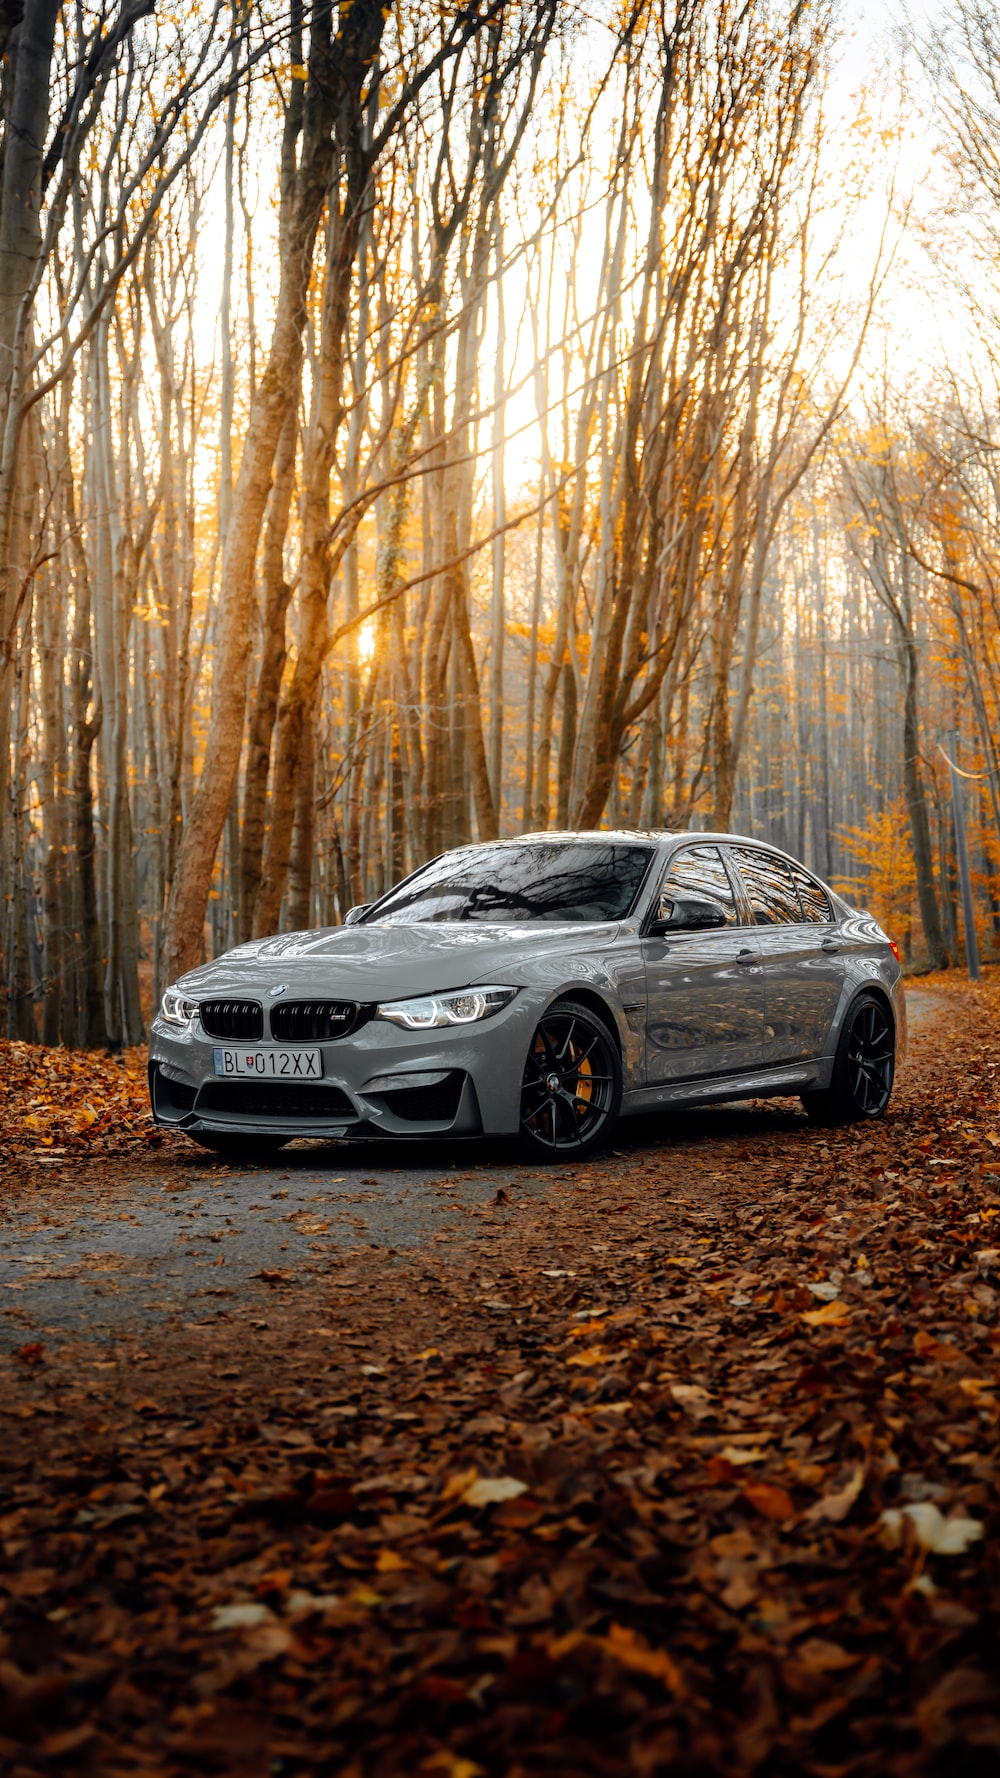 Bmw M3 Picture. Download Free Image